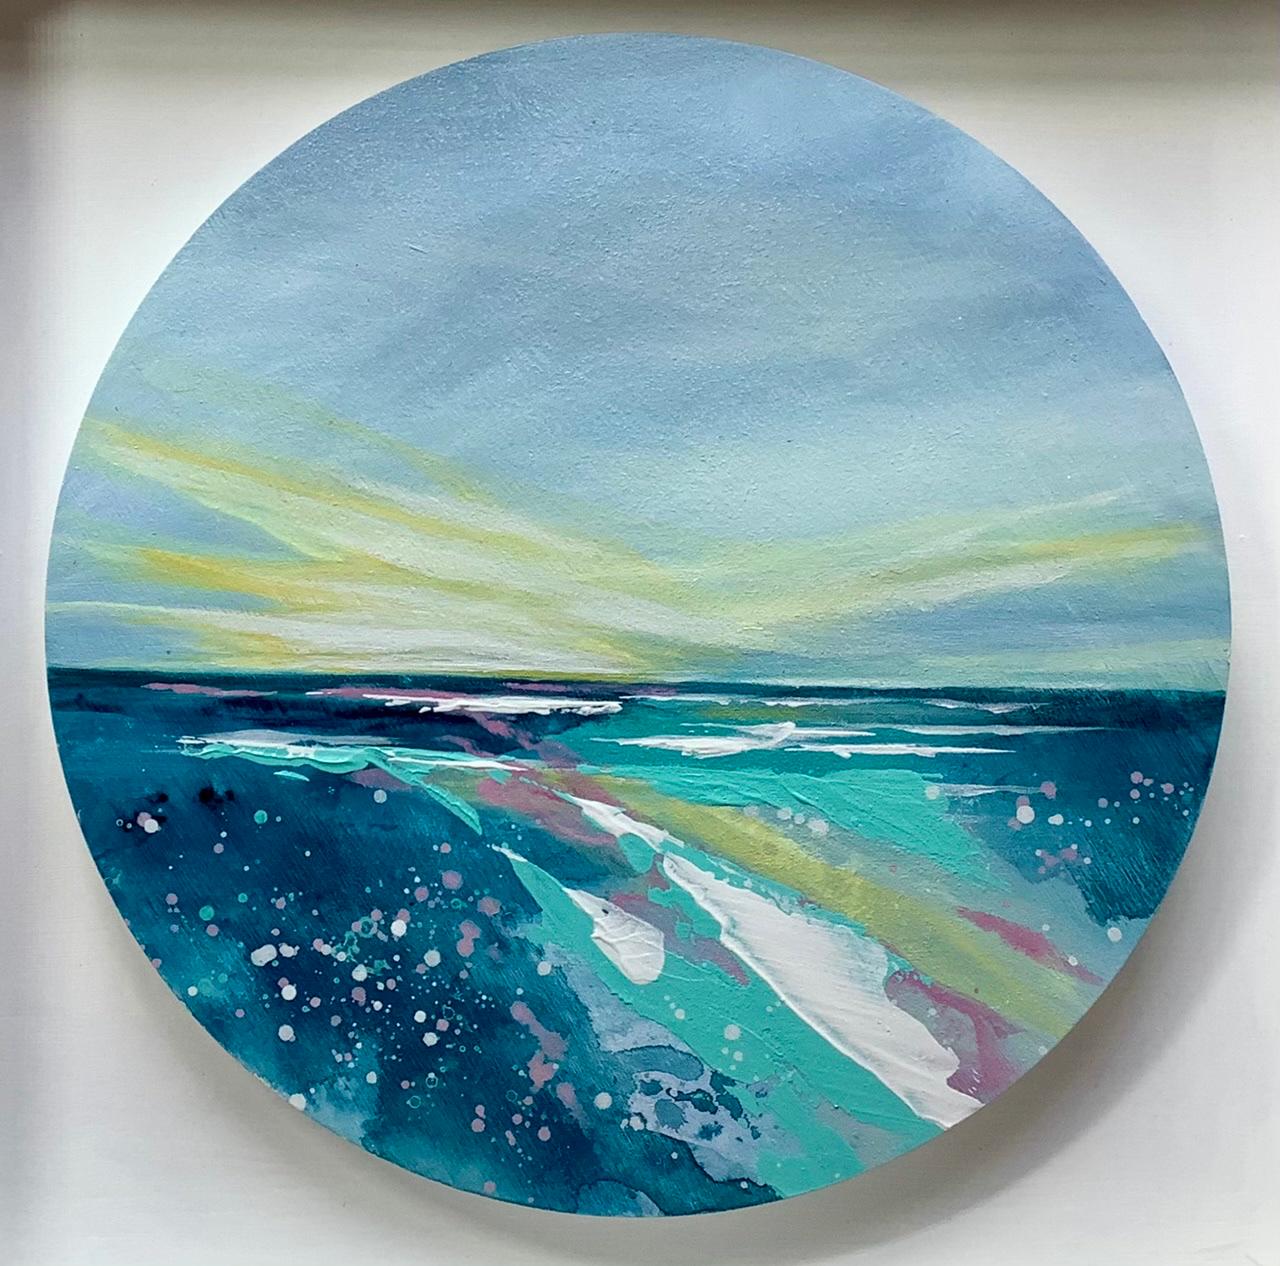 Adele Riley  Abstract Painting - Splintered Sun by Adele Riley, Original painting, Seascape and coastal art